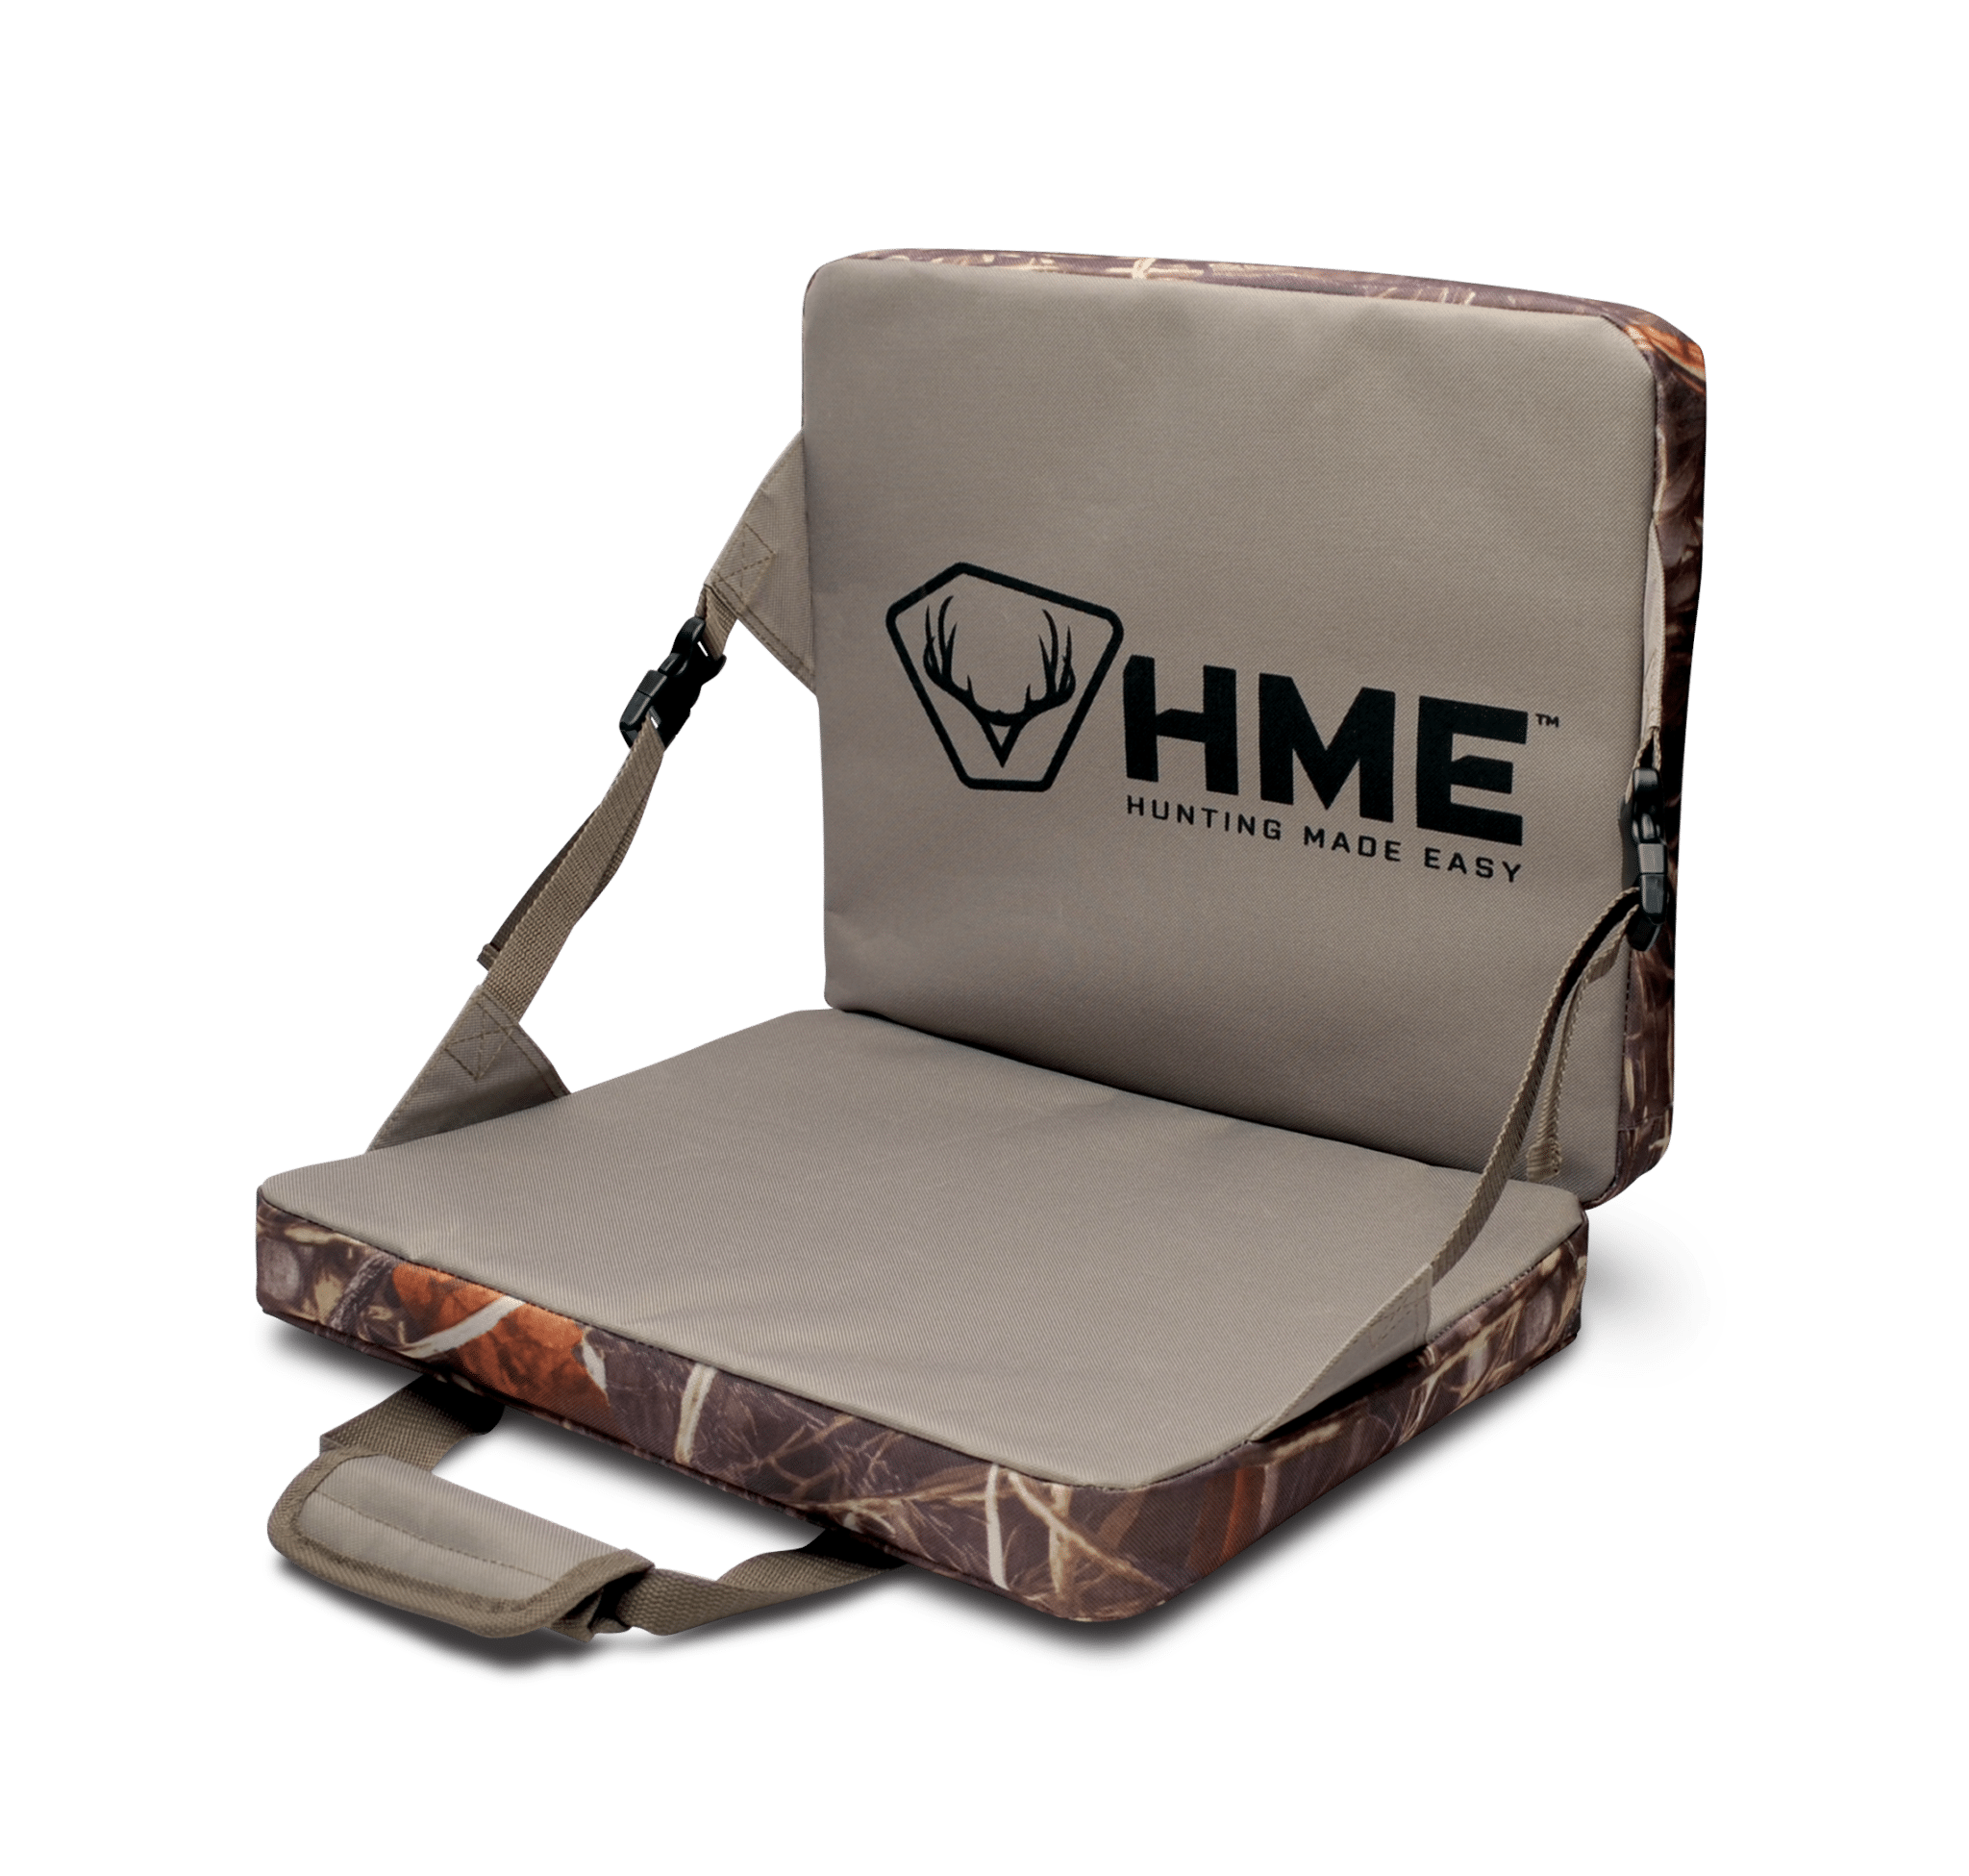 https://www.hmeproducts.com/wp-content/uploads/sites/5/2018/06/HME-Cushion-Open.png